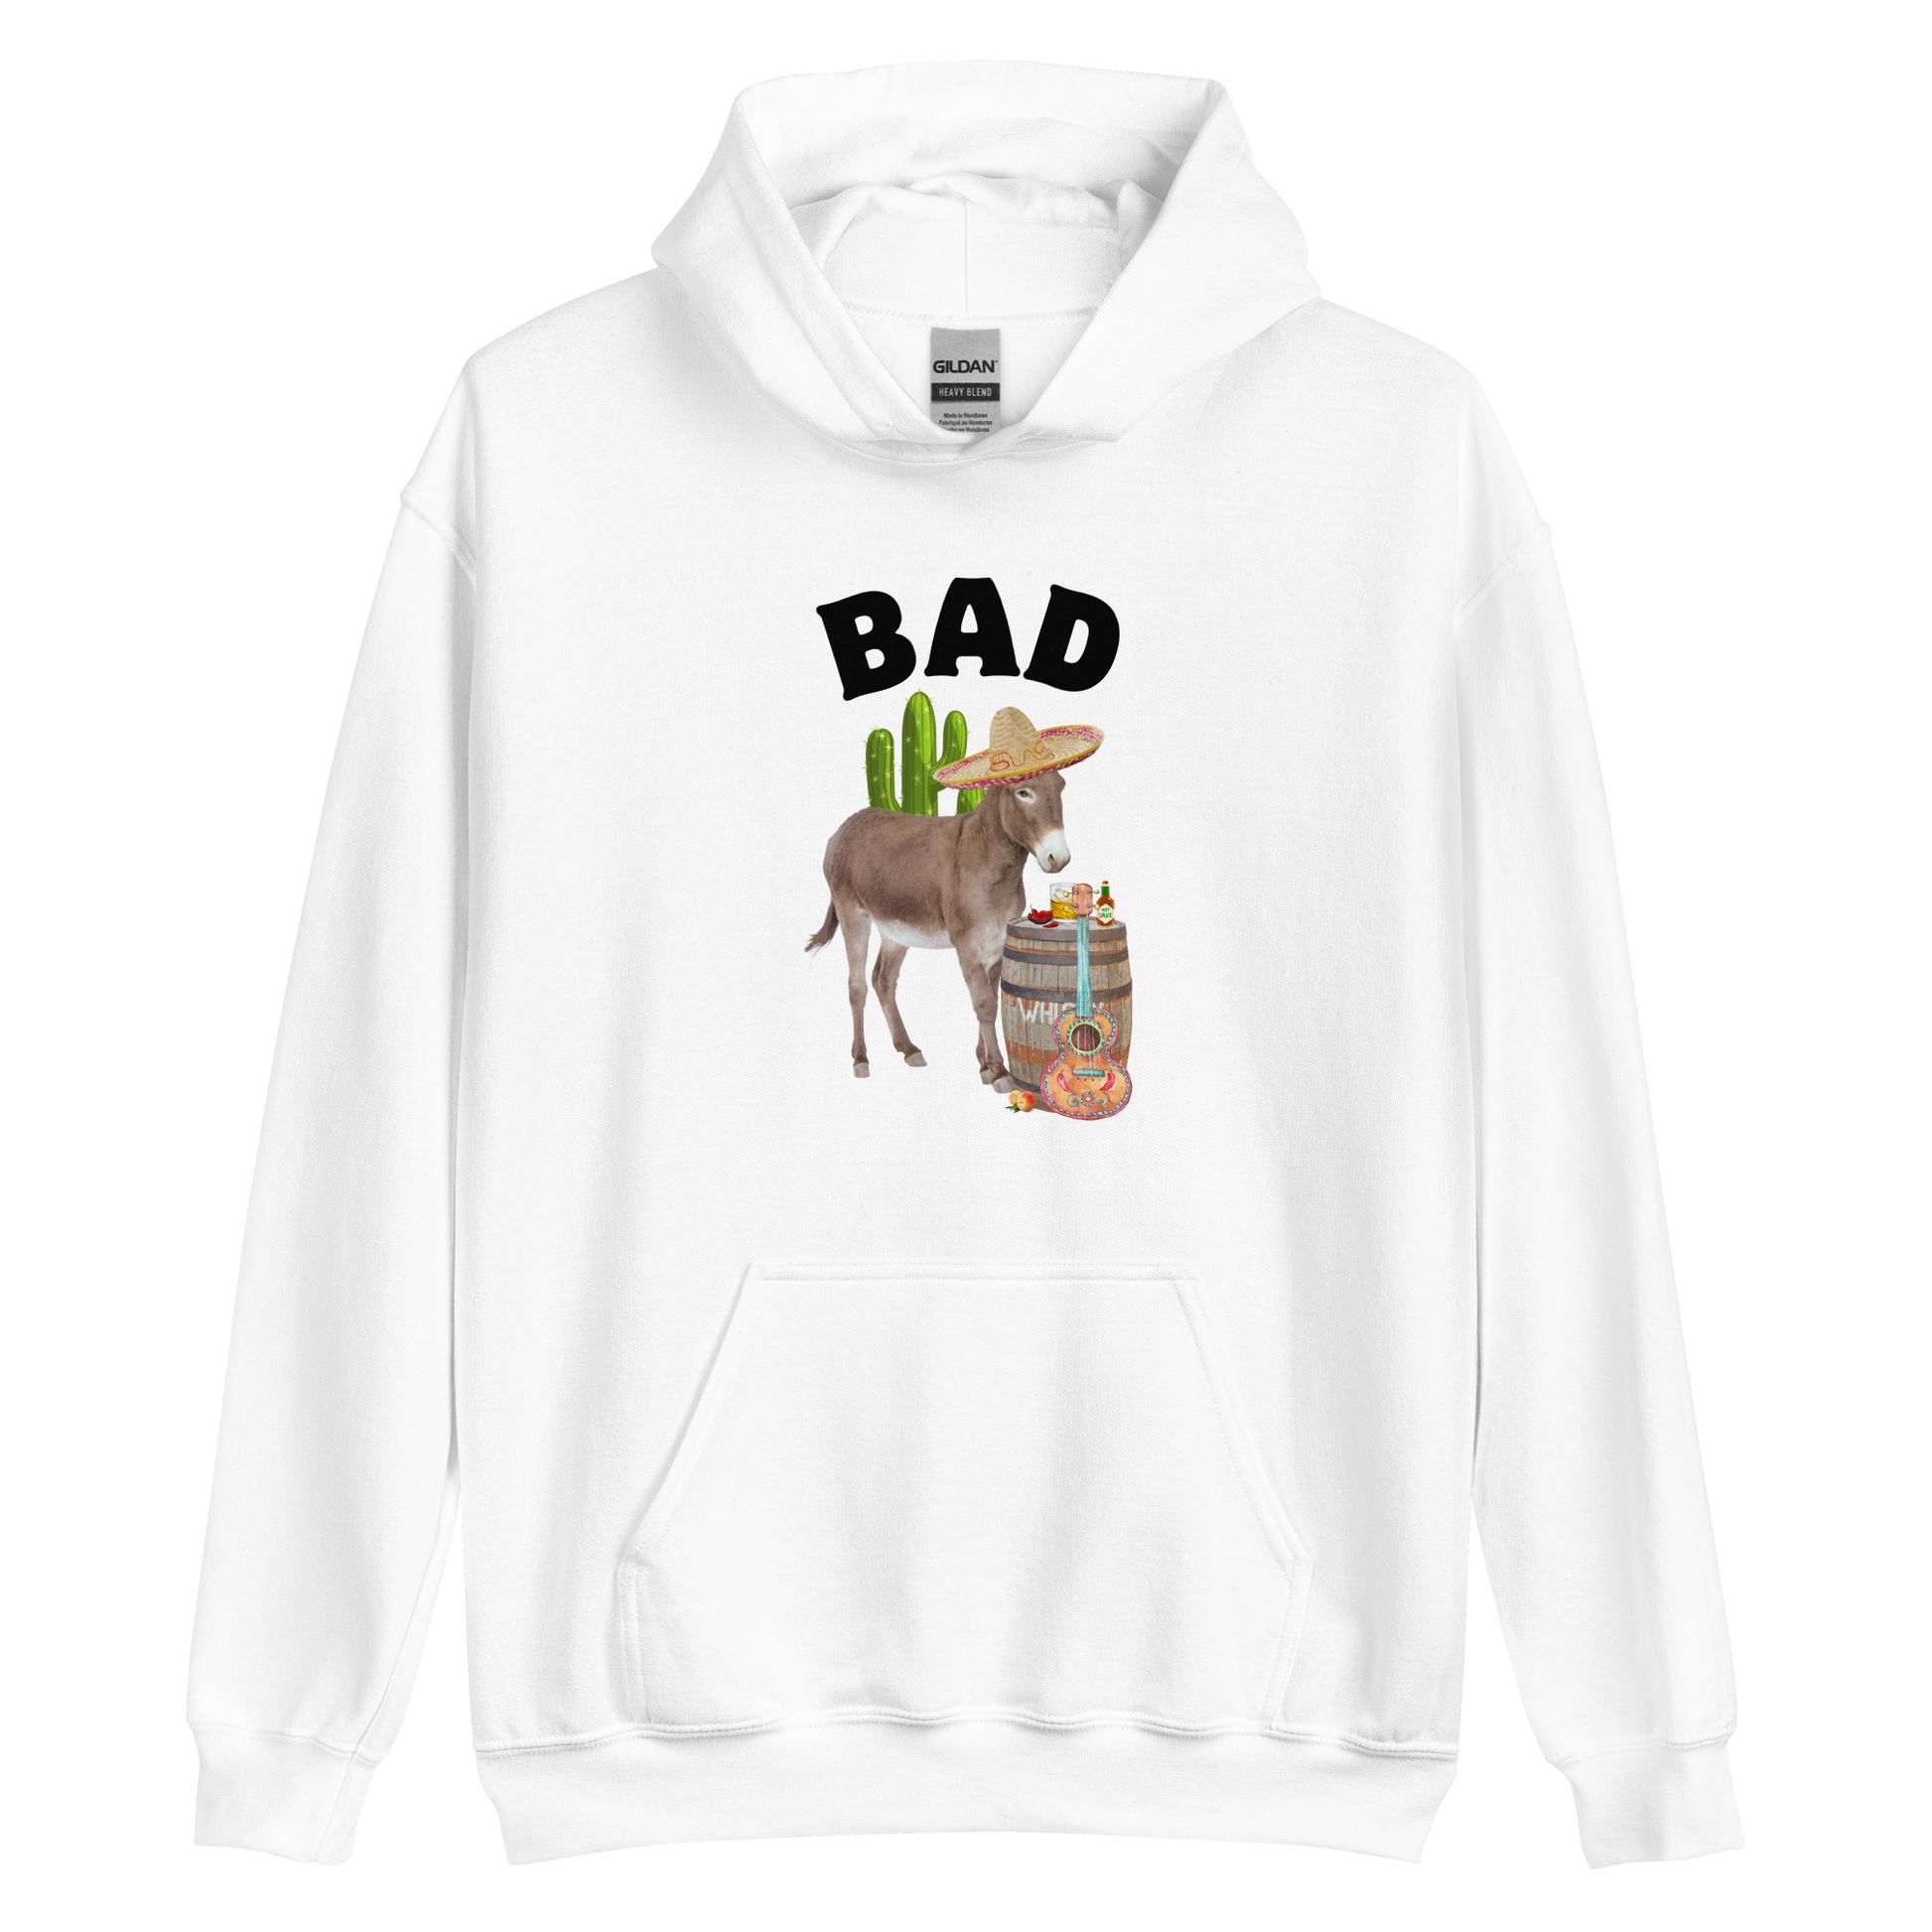 White Donkey Hoodie Featuring a Funny Bad Ass Donkey graphic on the chest - Funny Graphic Bad Ass Donkey Hoodies - Boozy Fox